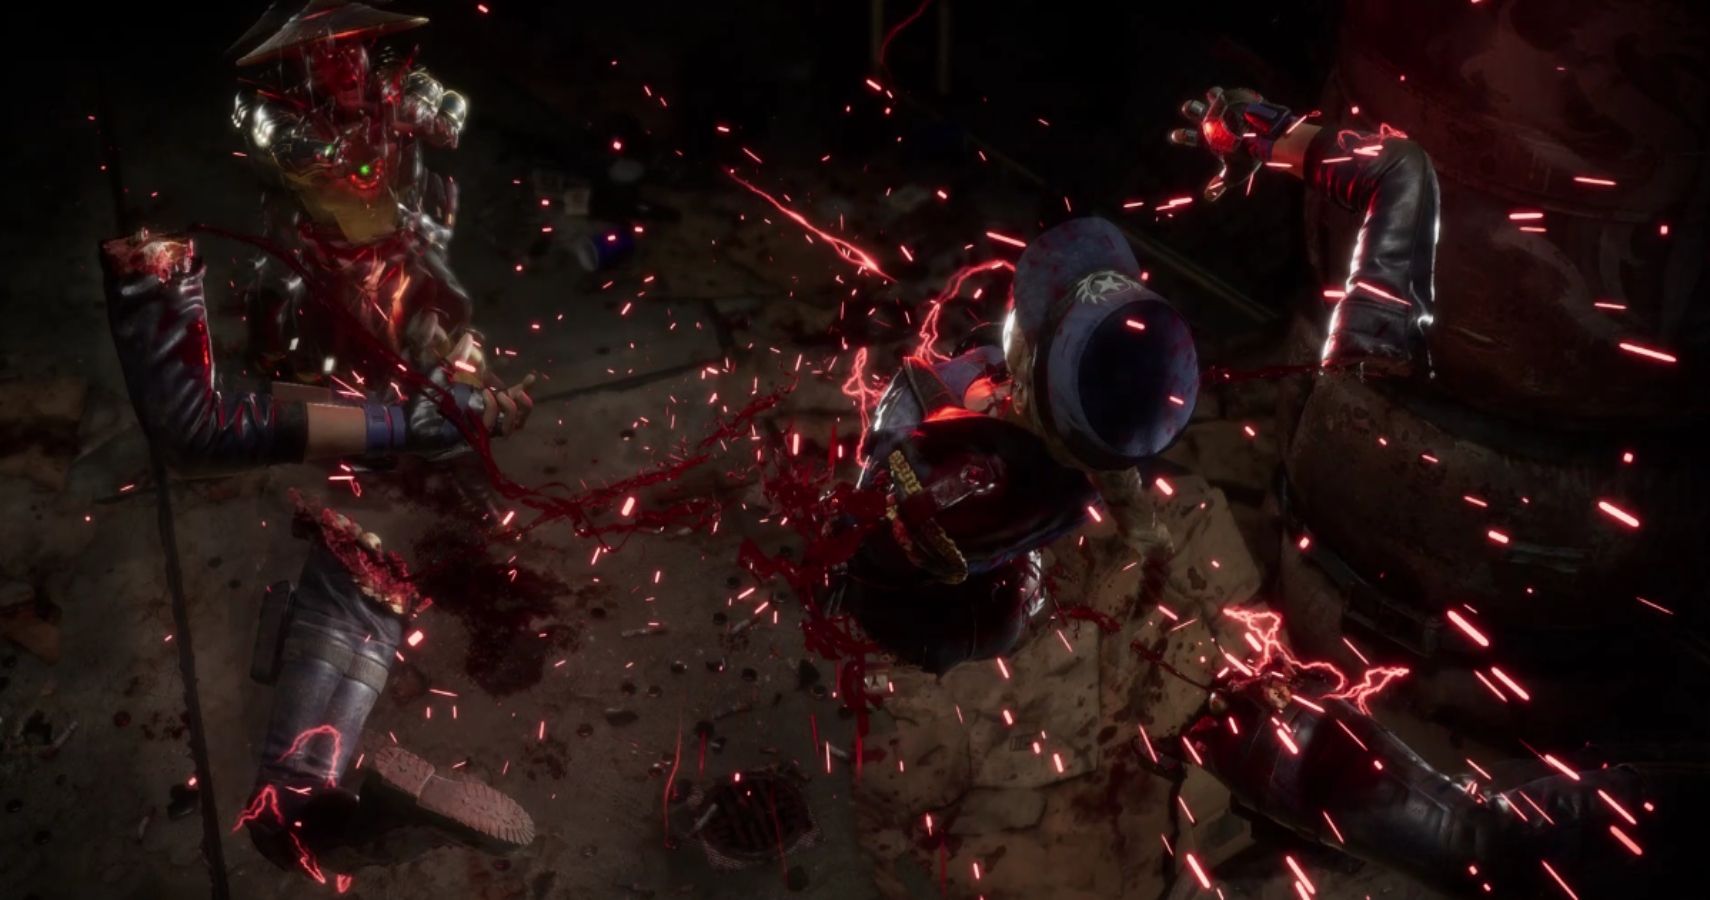 The 'Mortal Kombat' Writer Discusses His Gory New Video Game